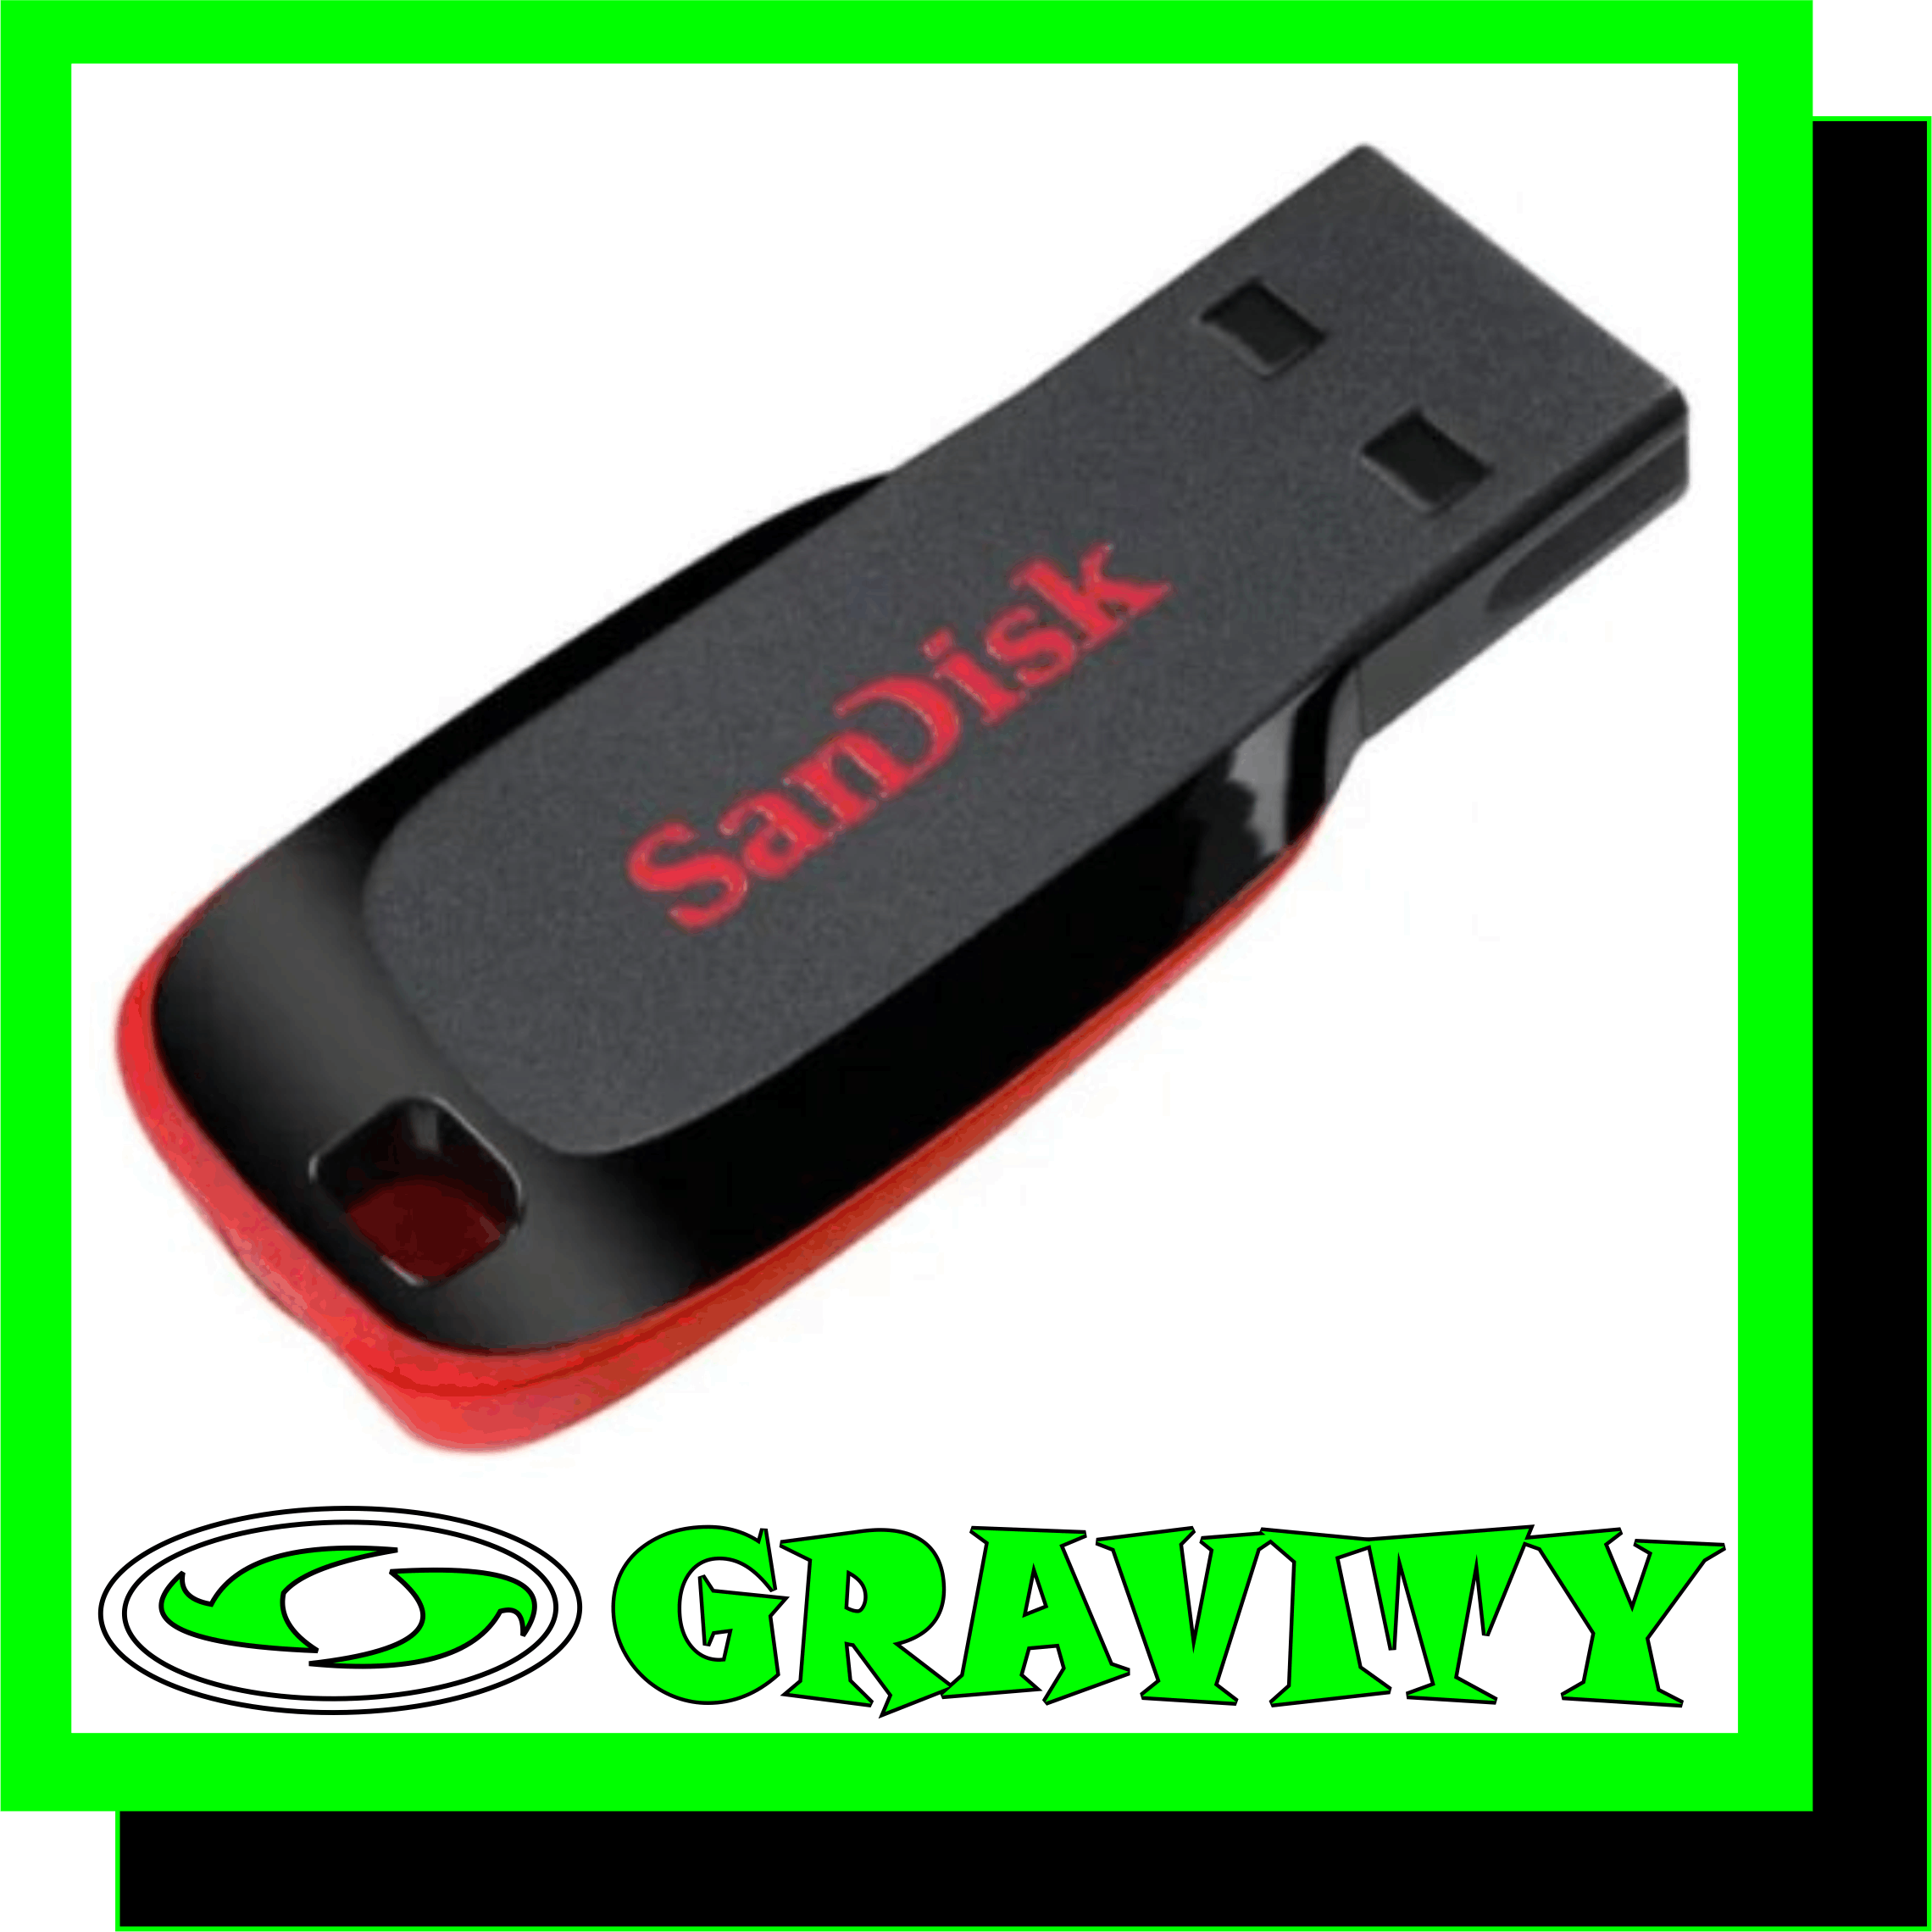 SanDisk Cruzer Blade 32GB - USB flash drive, Take your favorite files with you on the small and very portable SanDisk Cruzer Blade USB flash drive. Sleek in style and great in value, just pop your pictures, tunes or other fun files onto the SanDisk Cruzer Blade USB flash drive and start sharing with your family and friends the small, swift way.  Features:  - Ultra-compact and portable contoured styling  - Share your photos, videos, songs and other files between computers with ease  - Potect your private files with included SanDisk SecureAccess software   Note: Some of the listed storage capacity is used for formatting and other purposes and is not available for data storage.  1GB equals 1 billion bytes.